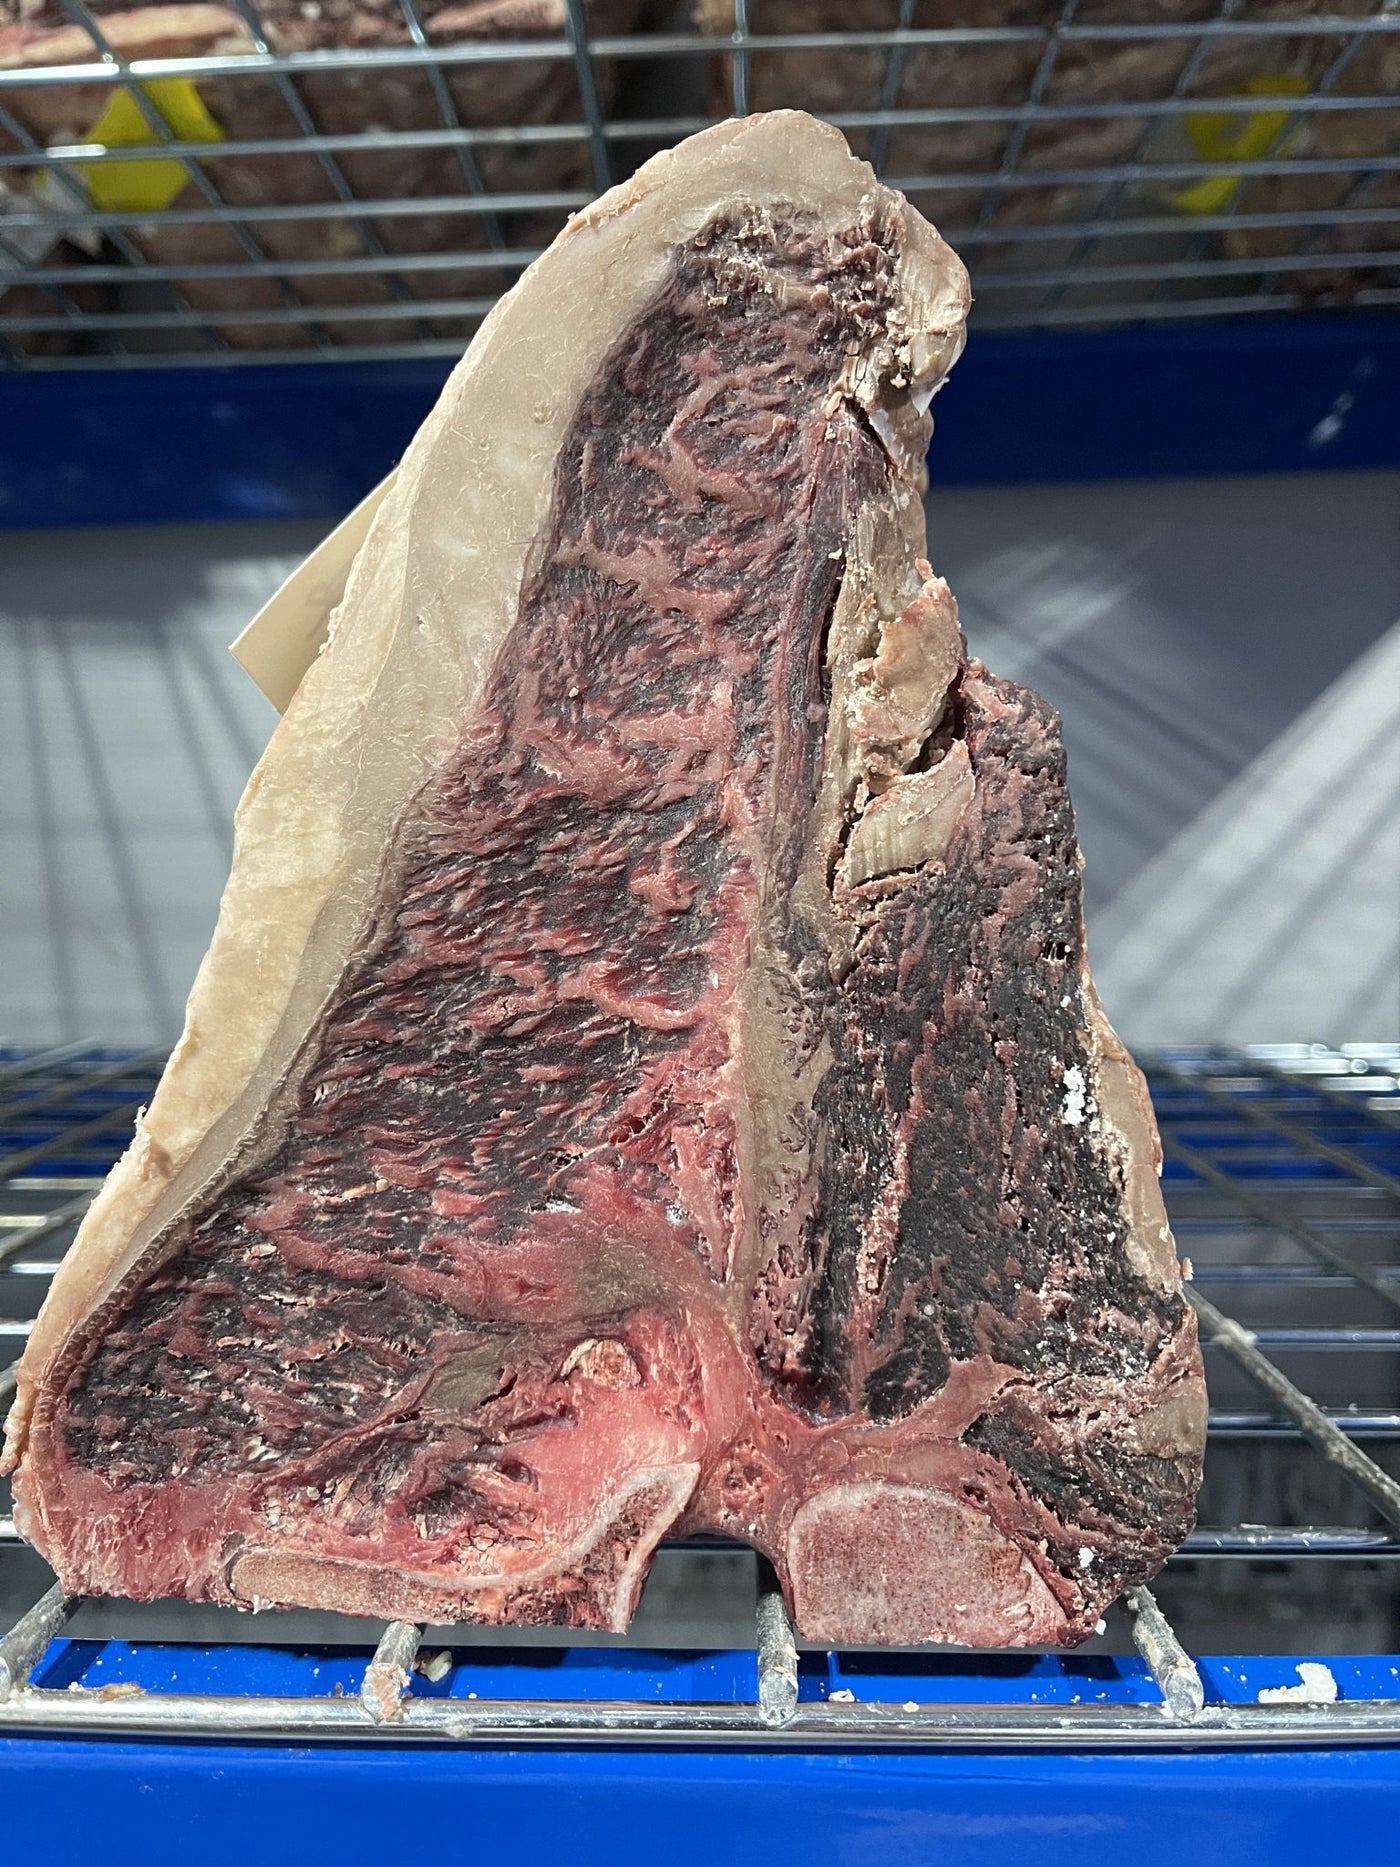 35 Day Aged Wild River Wagyu T-Bone, BMS 8+ - Thomas Joseph Butchery - Ethical Dry-Aged Meat The Best Steak UK Thomas Joseph Butchery